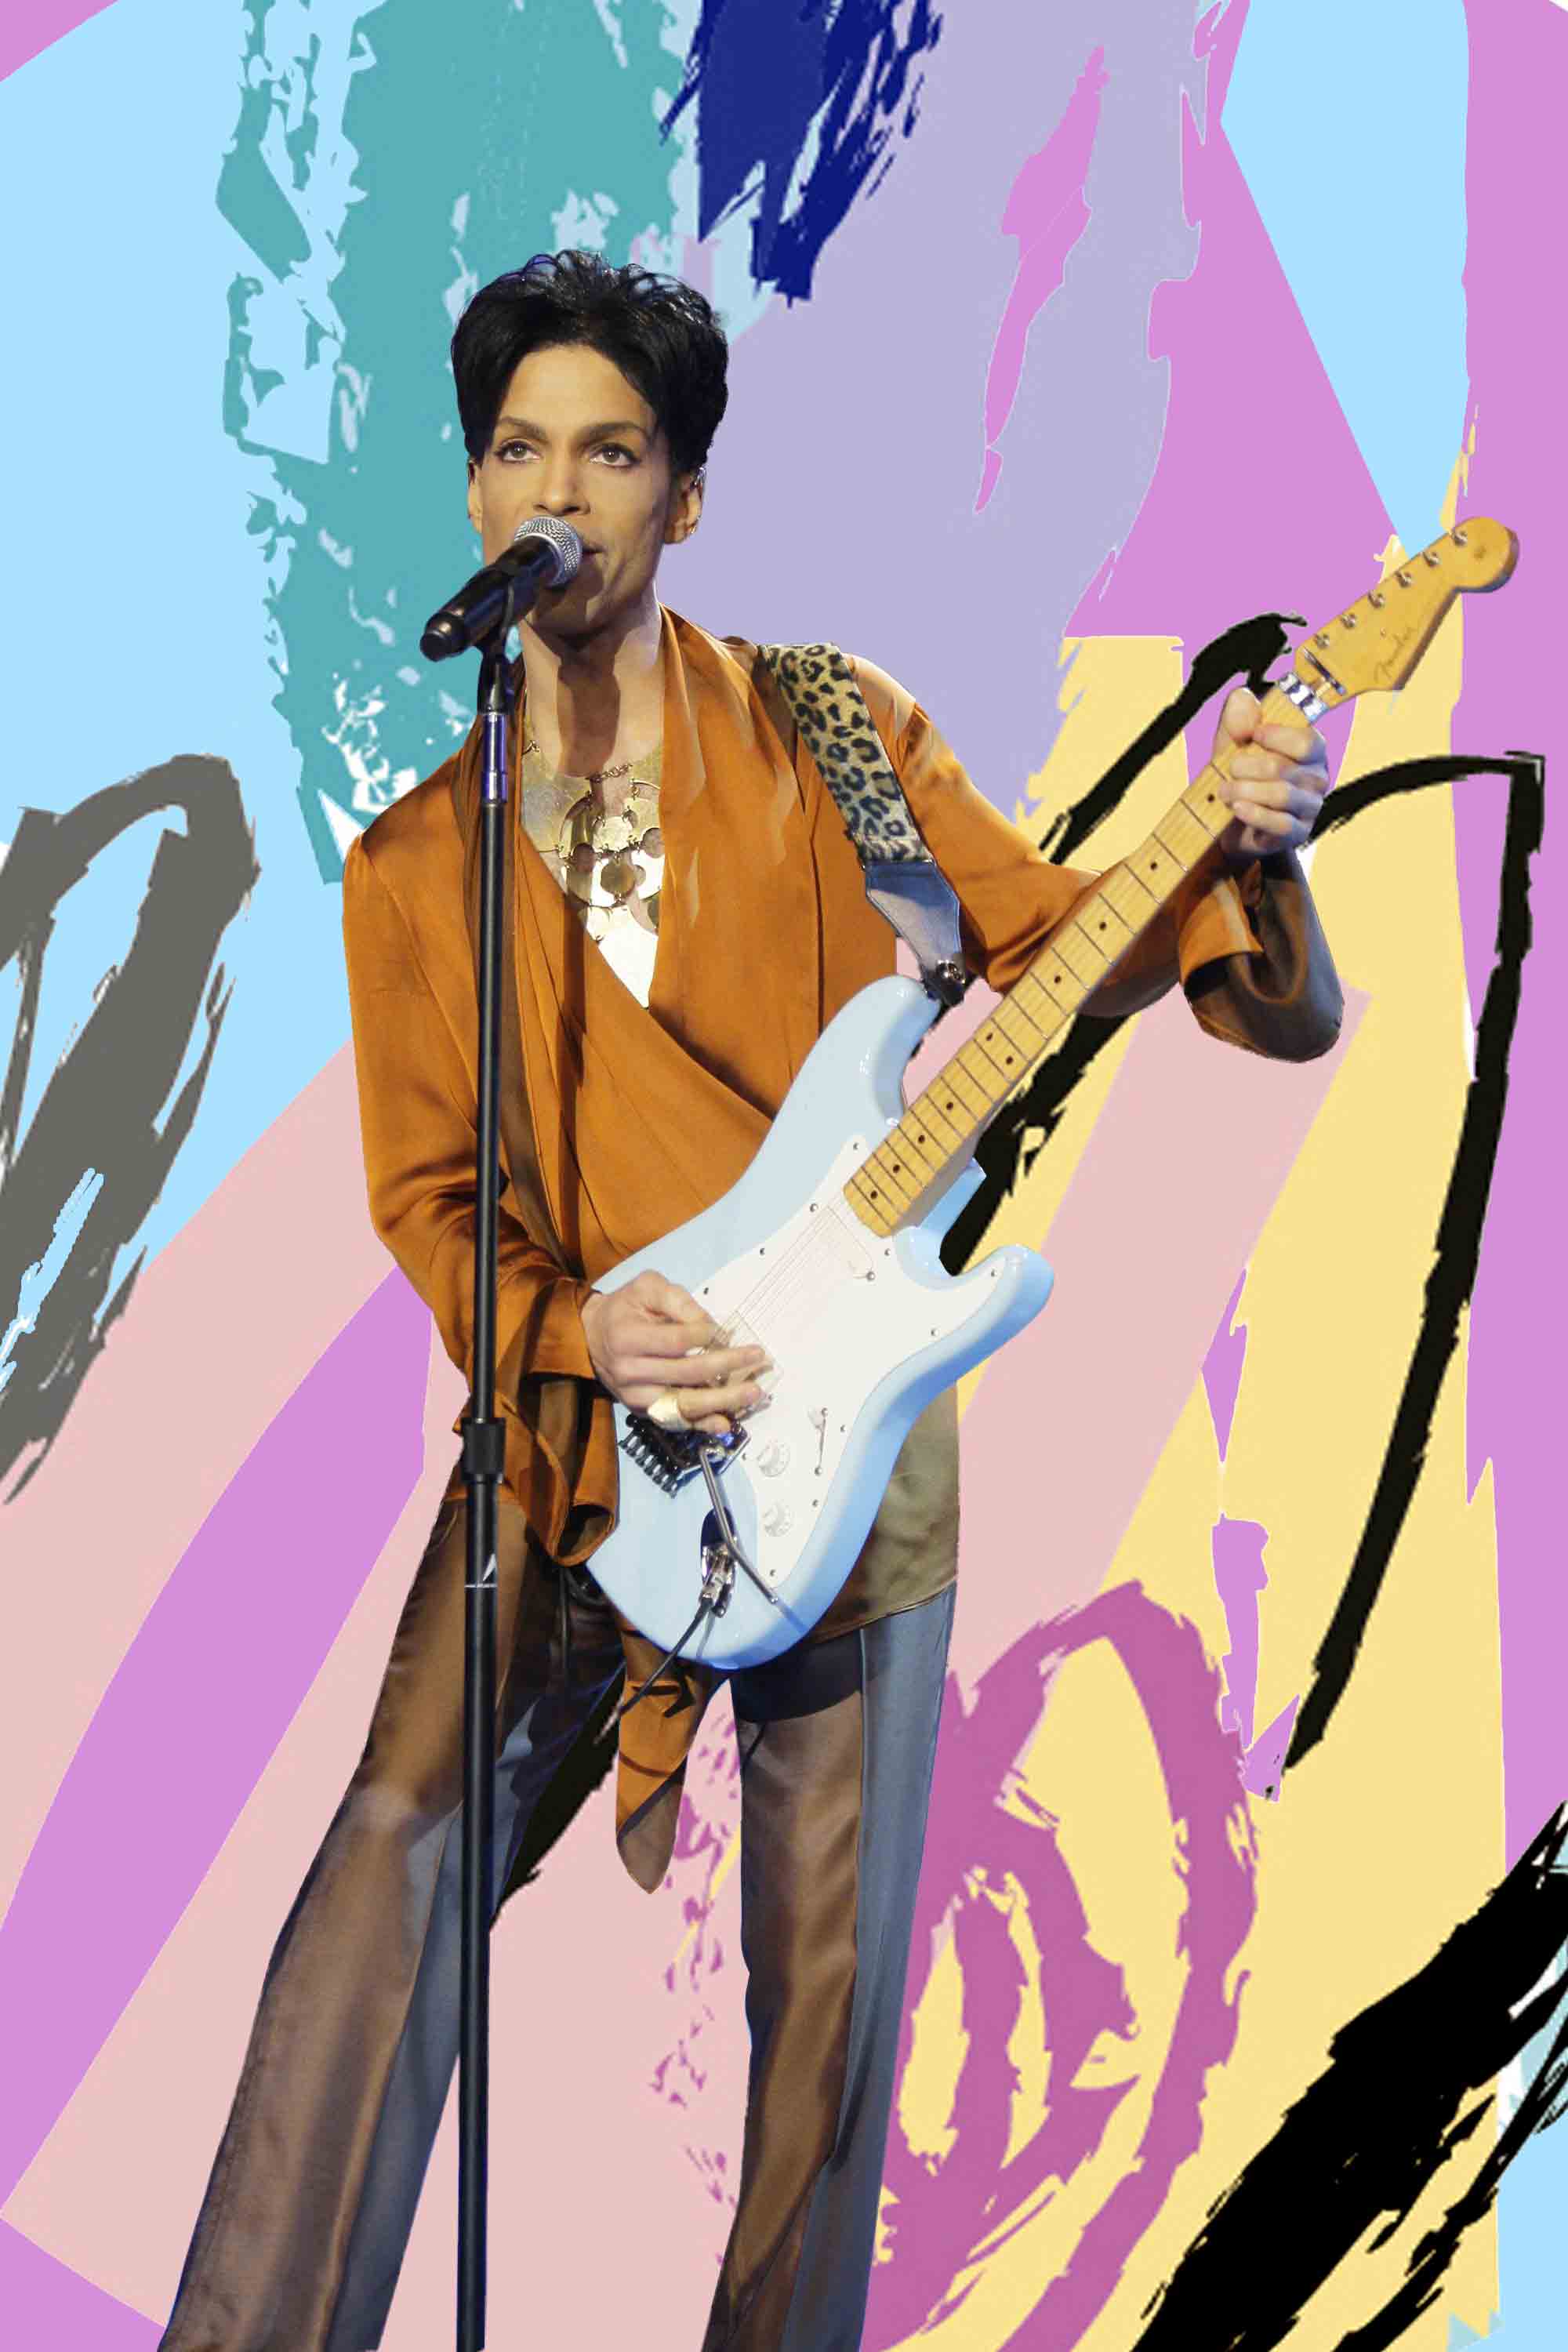 Prince's Estate Announces Special Concert Featuring Unreleased Material
